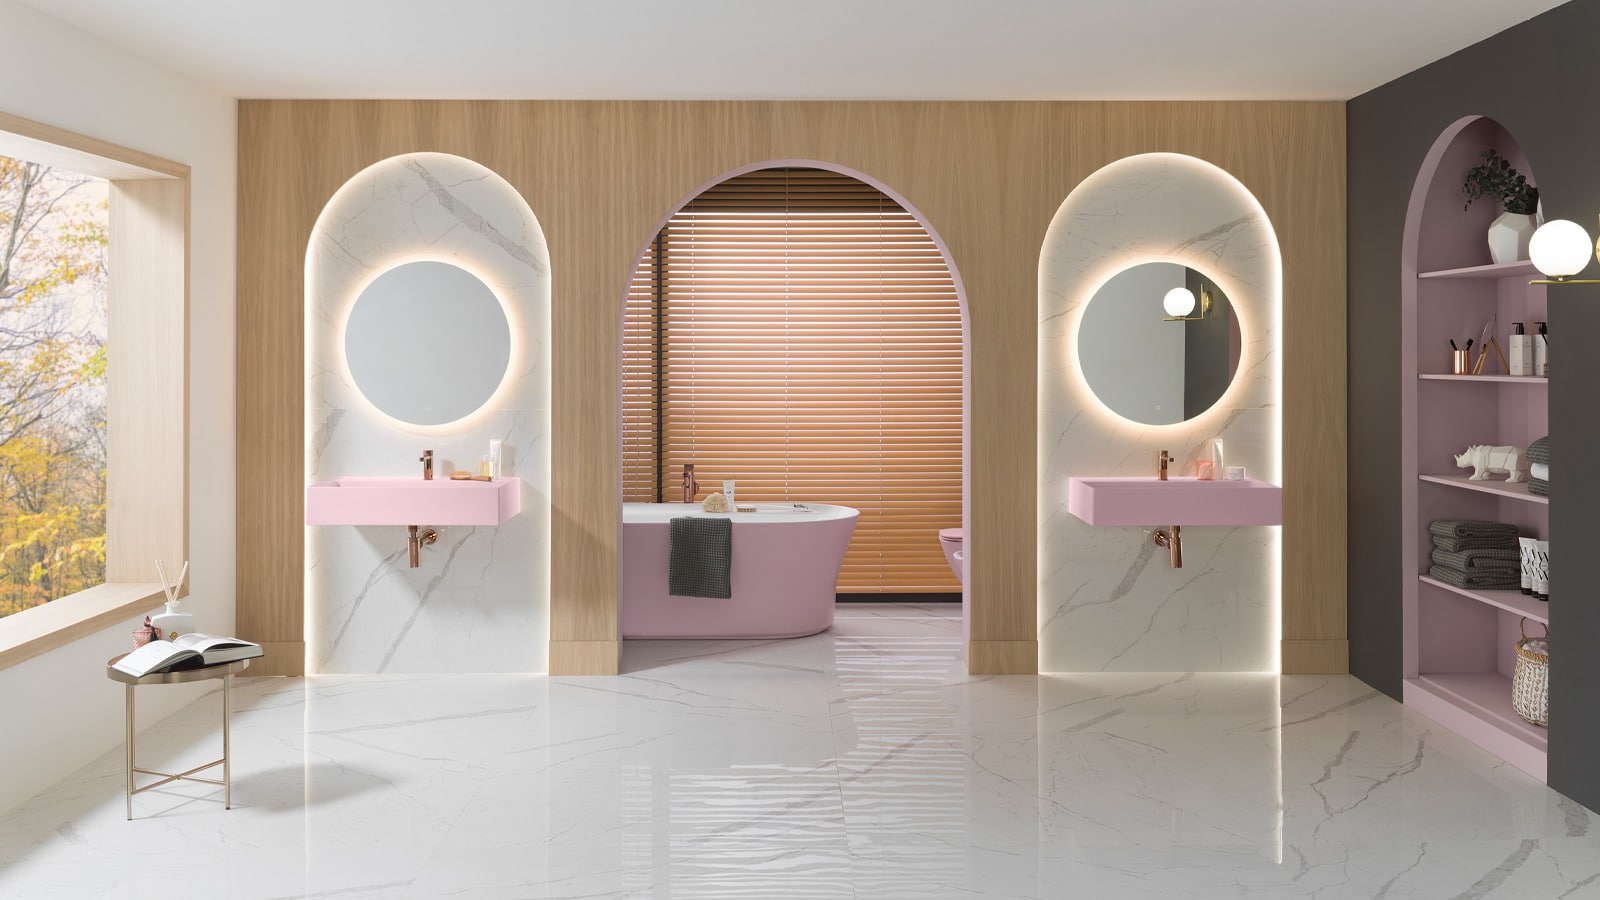 Innovation comes first in PORCELANOSA Group's latest designs